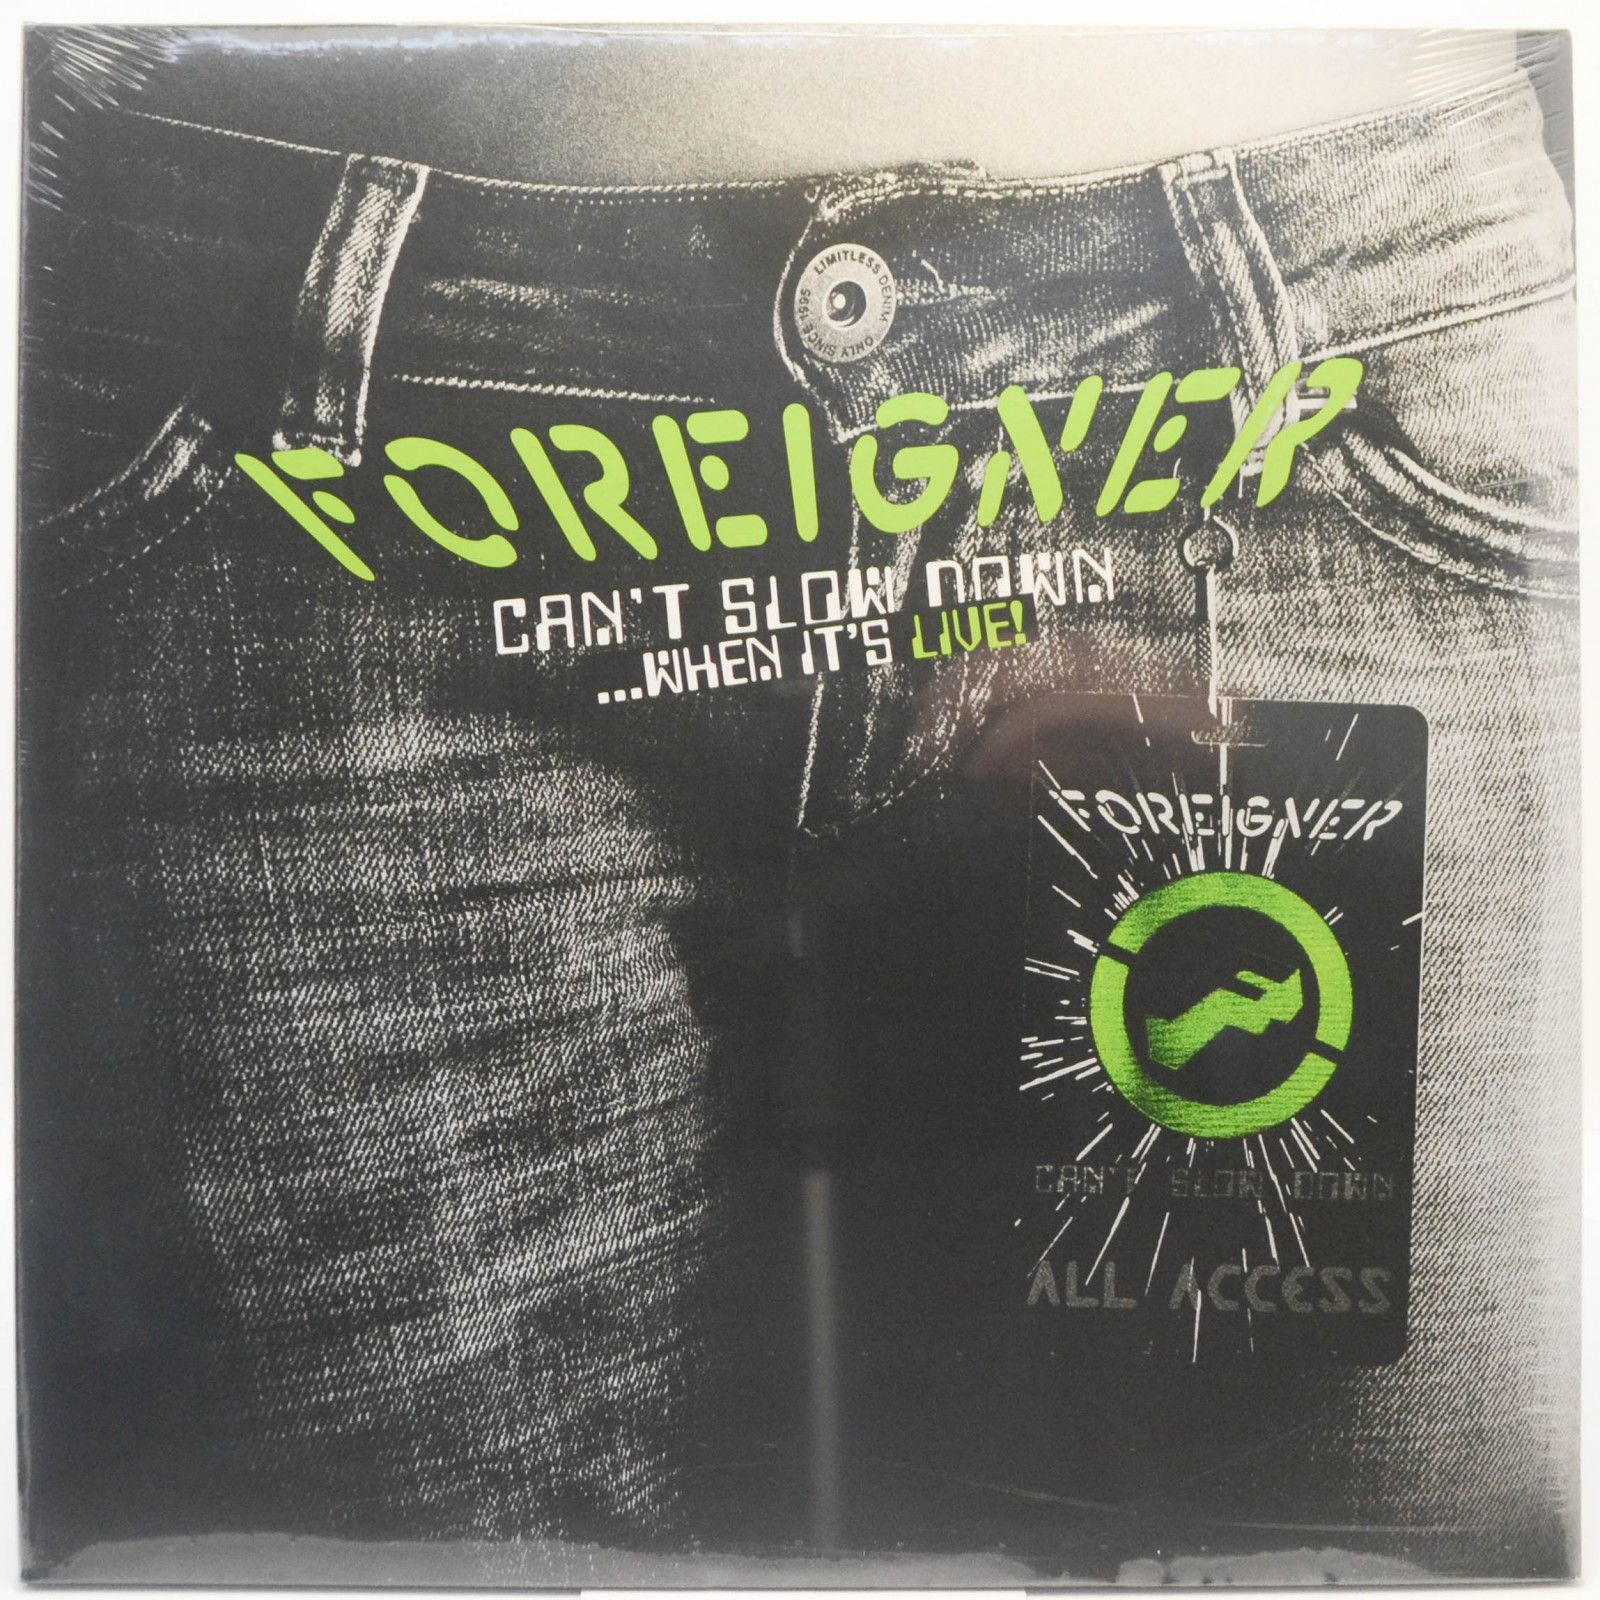 Foreigner — Can't Slow Down...When It's Live! (2LP), 2010